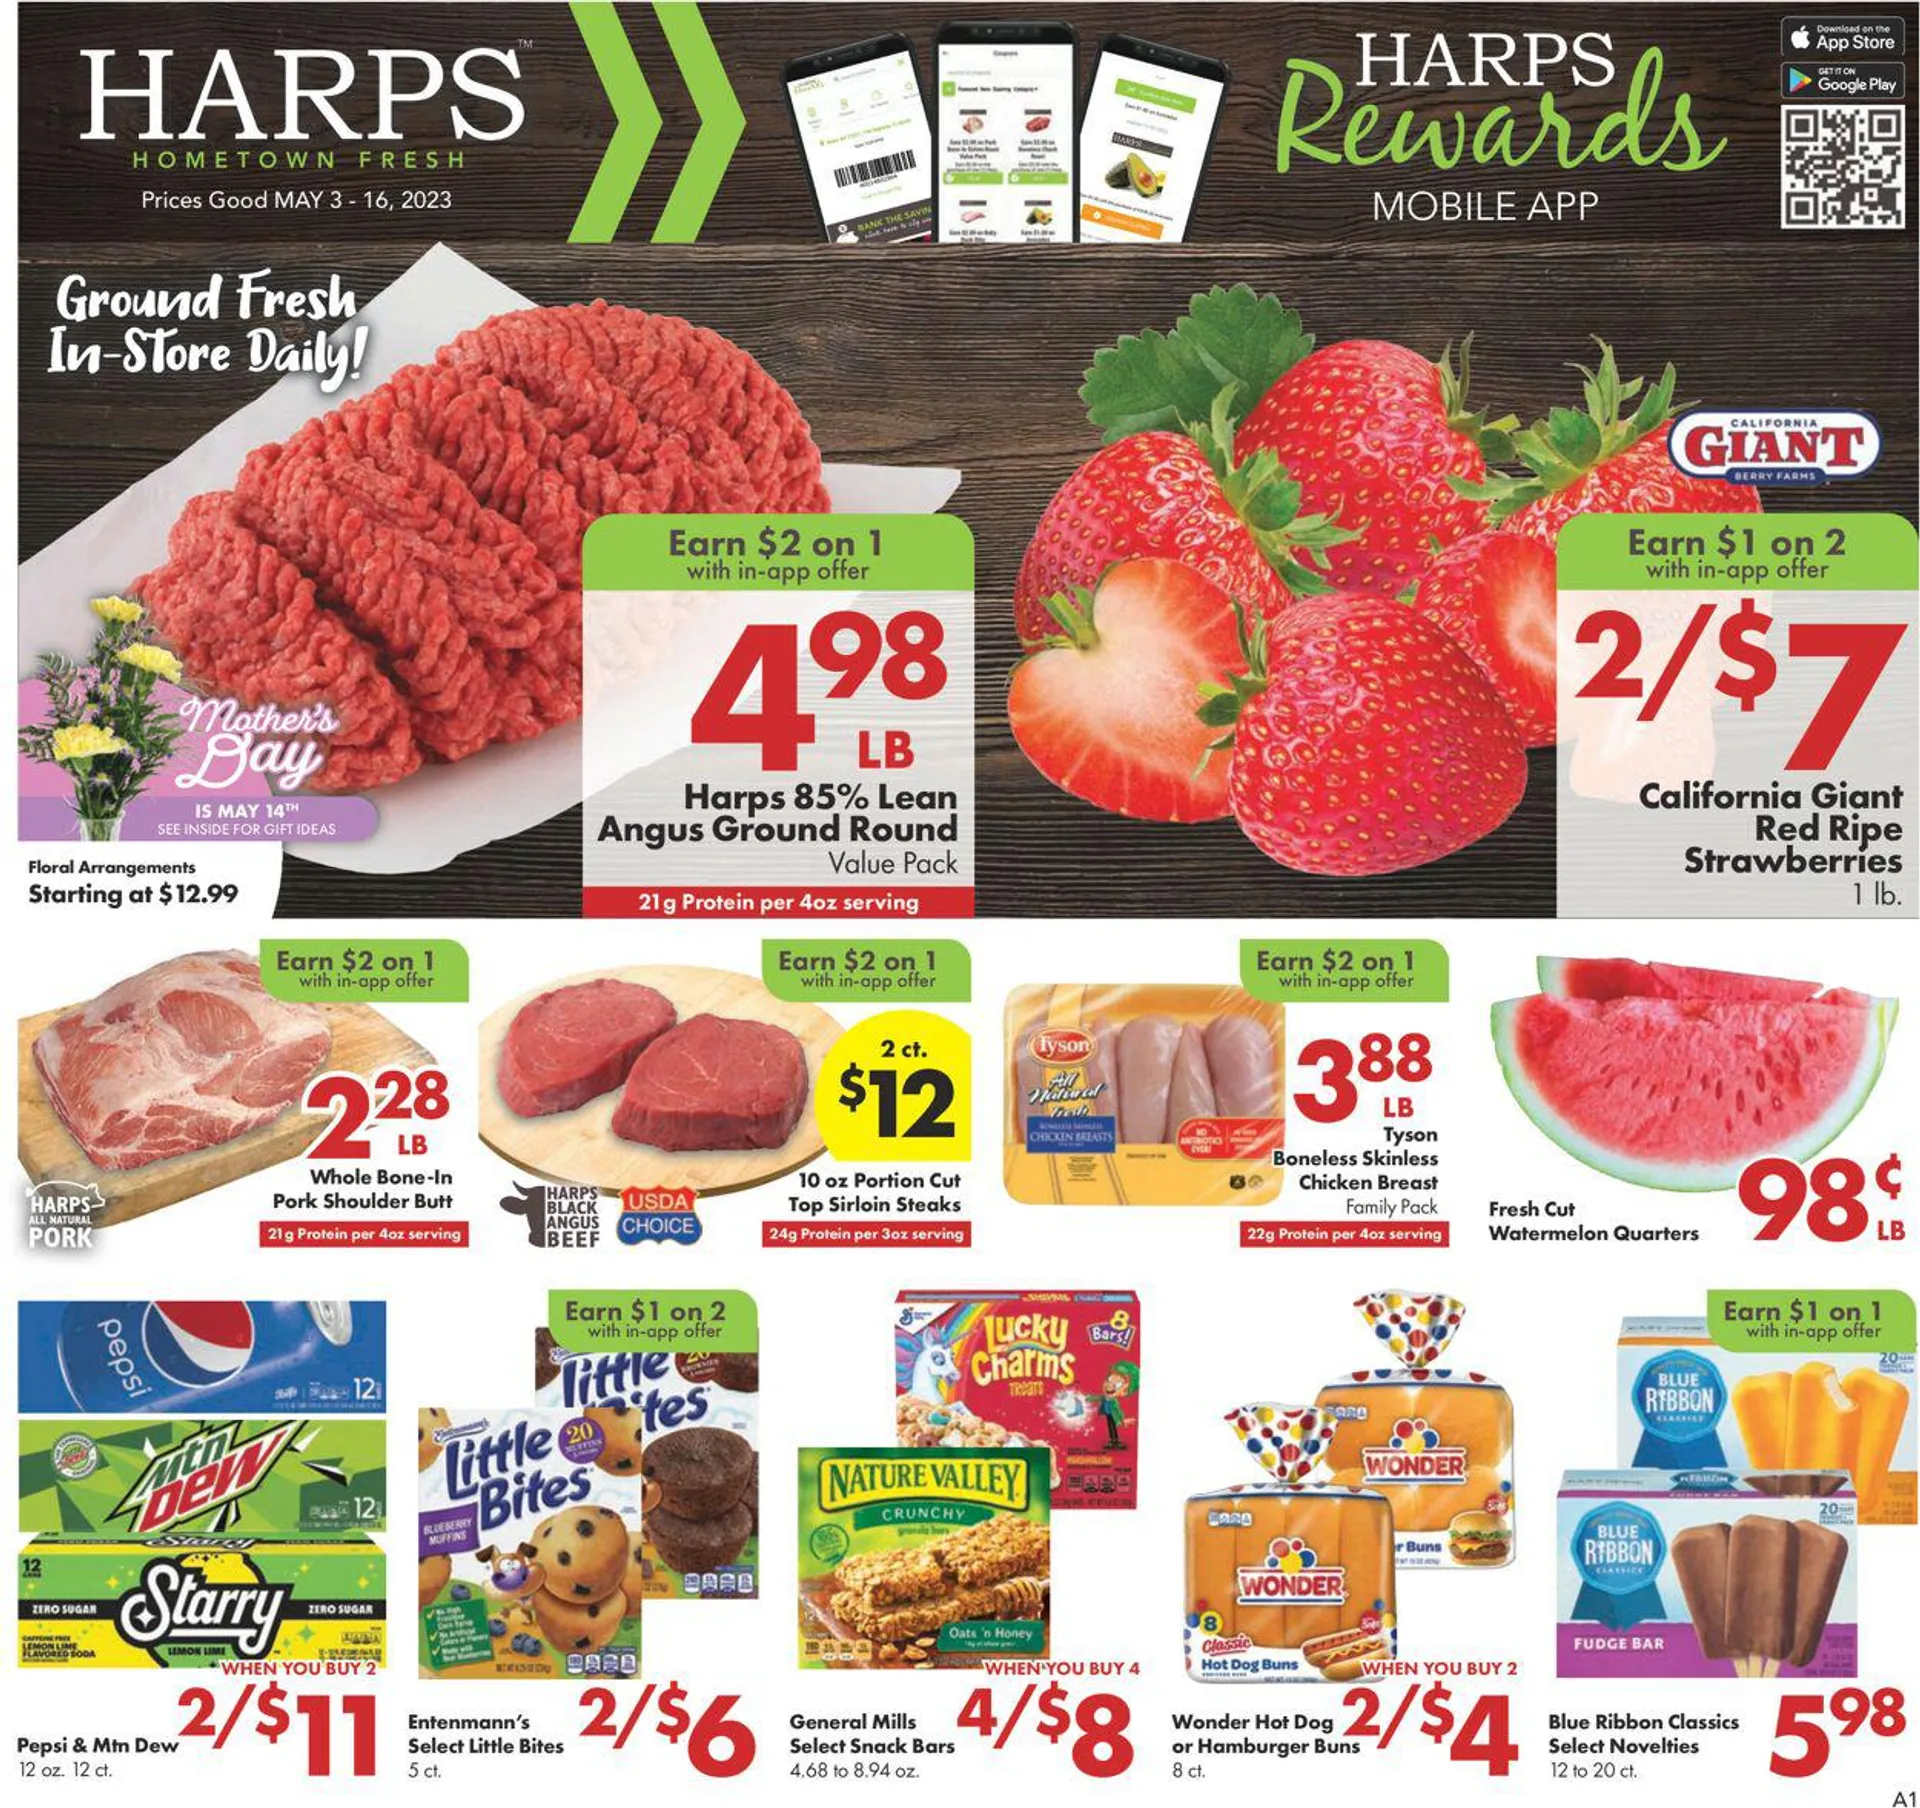 Harps Foods Current weekly ad - 1